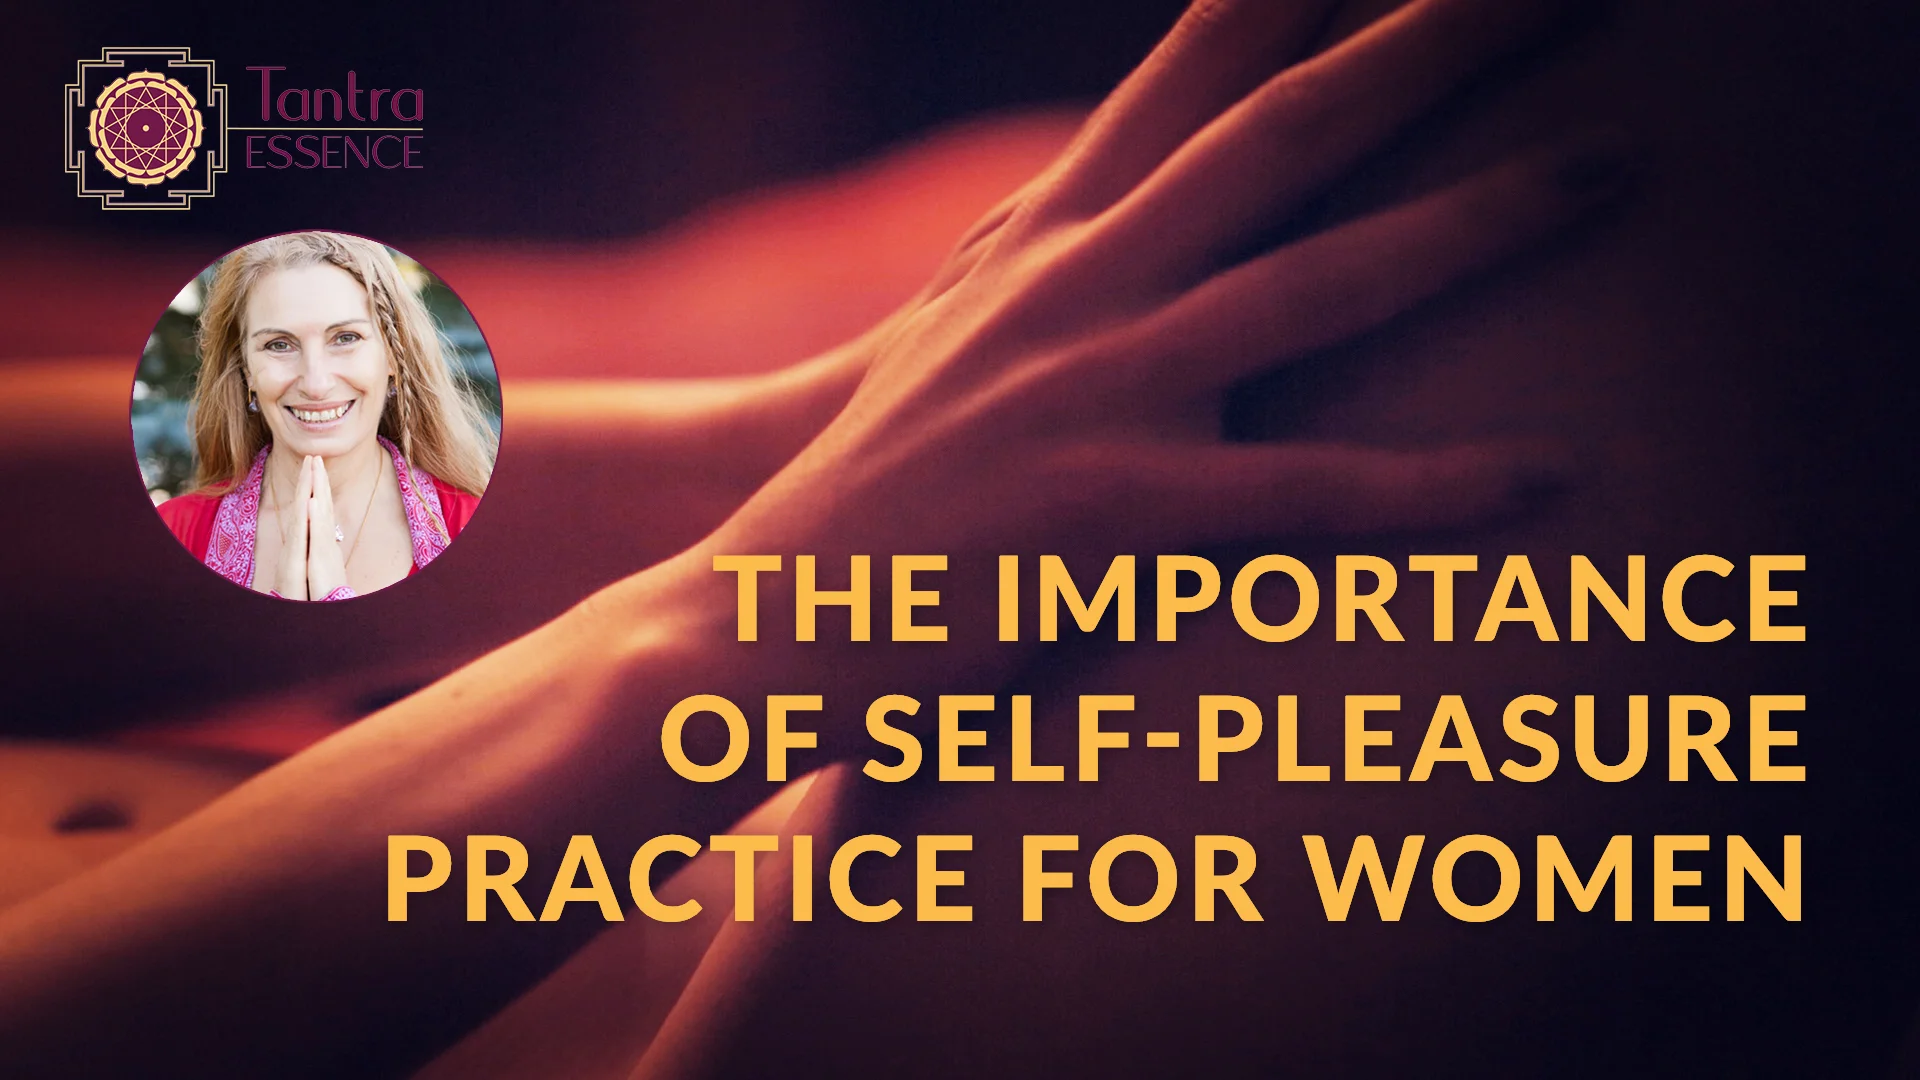 The importance of self-pleasure practice for women.